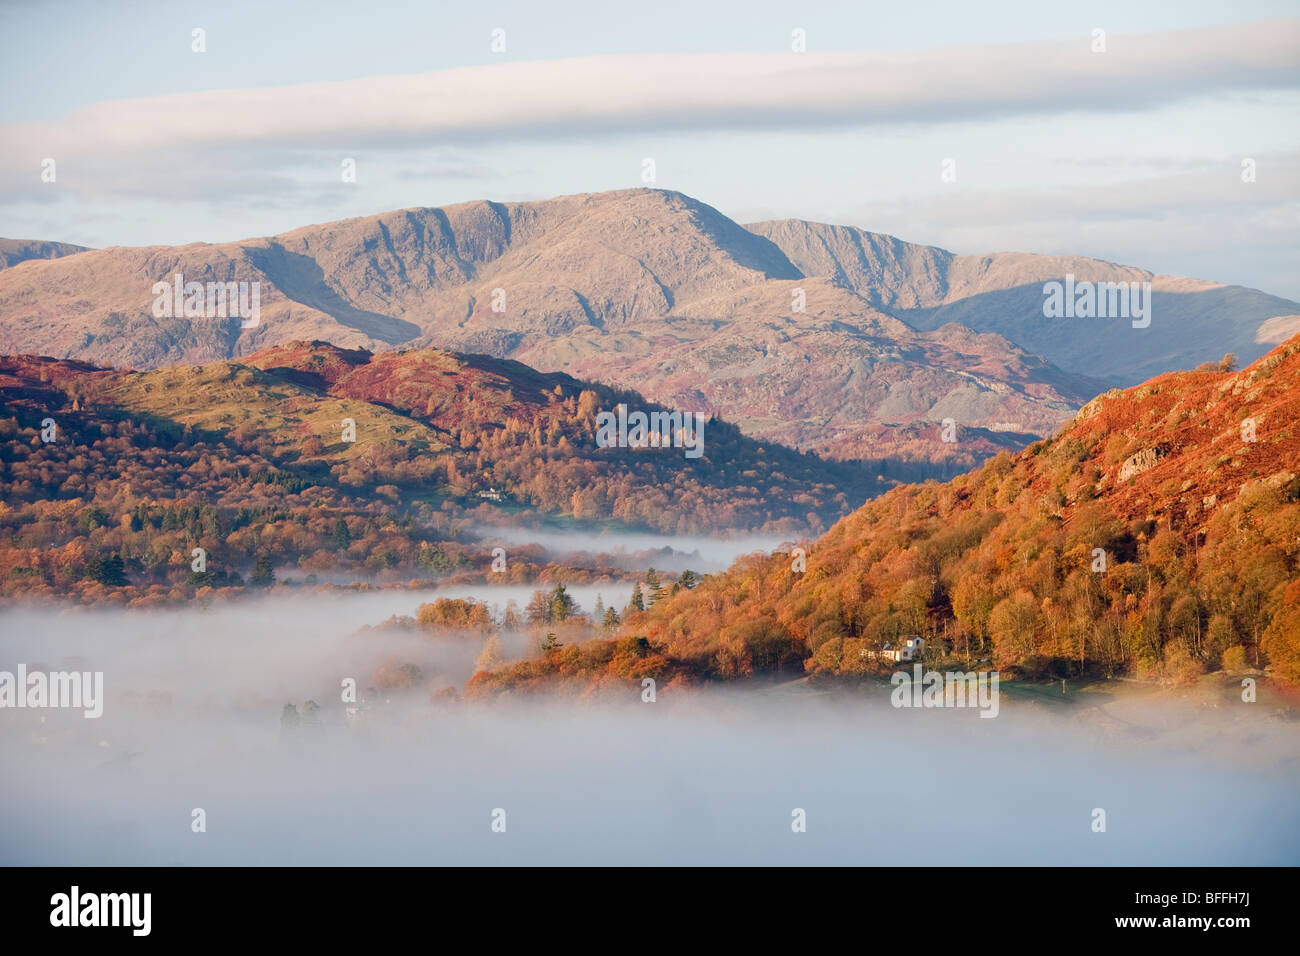 Mist caused by a temperature inversion over Ambleside in the Lake District, UK. Stock Photo